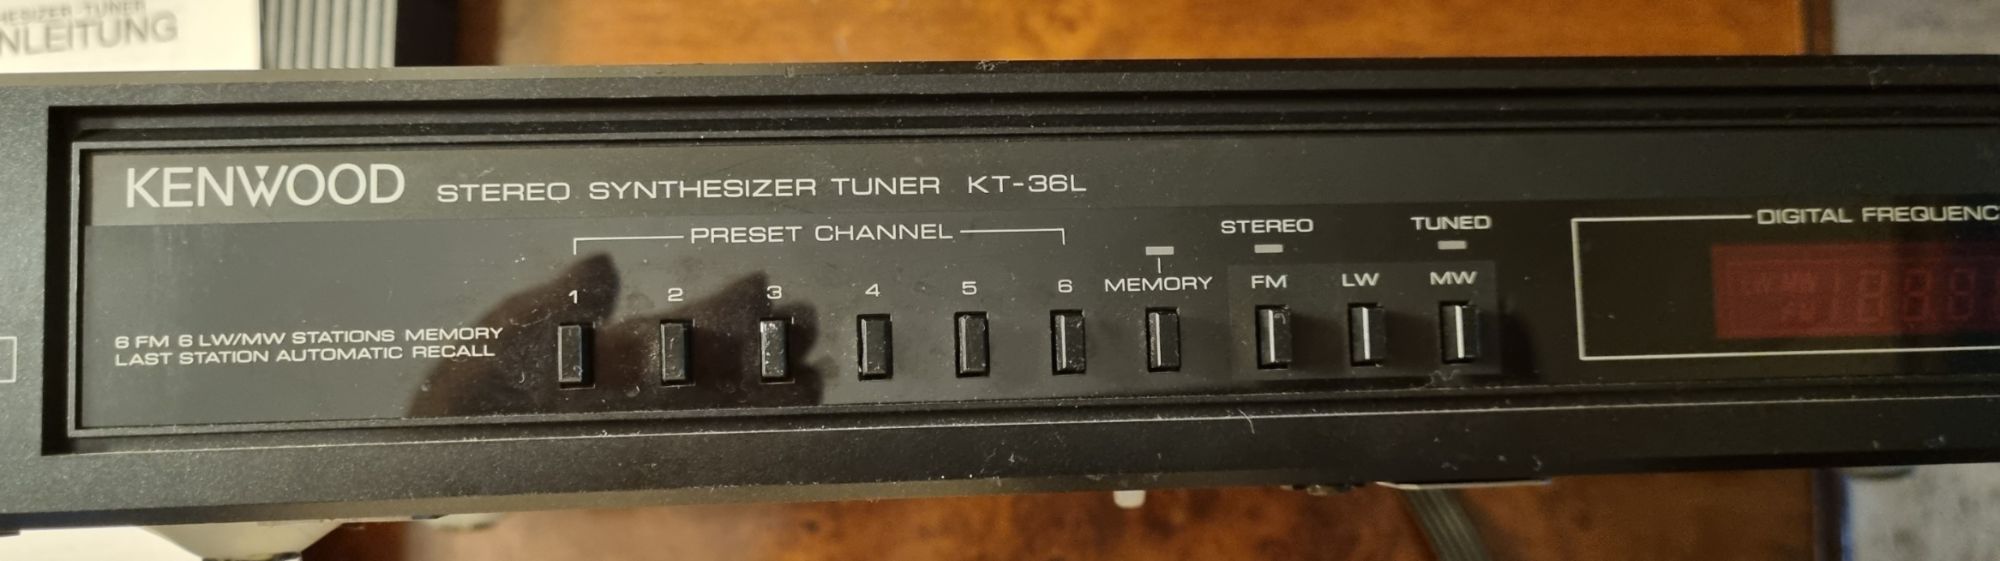 Tuner kenwood stereo d'occasion  